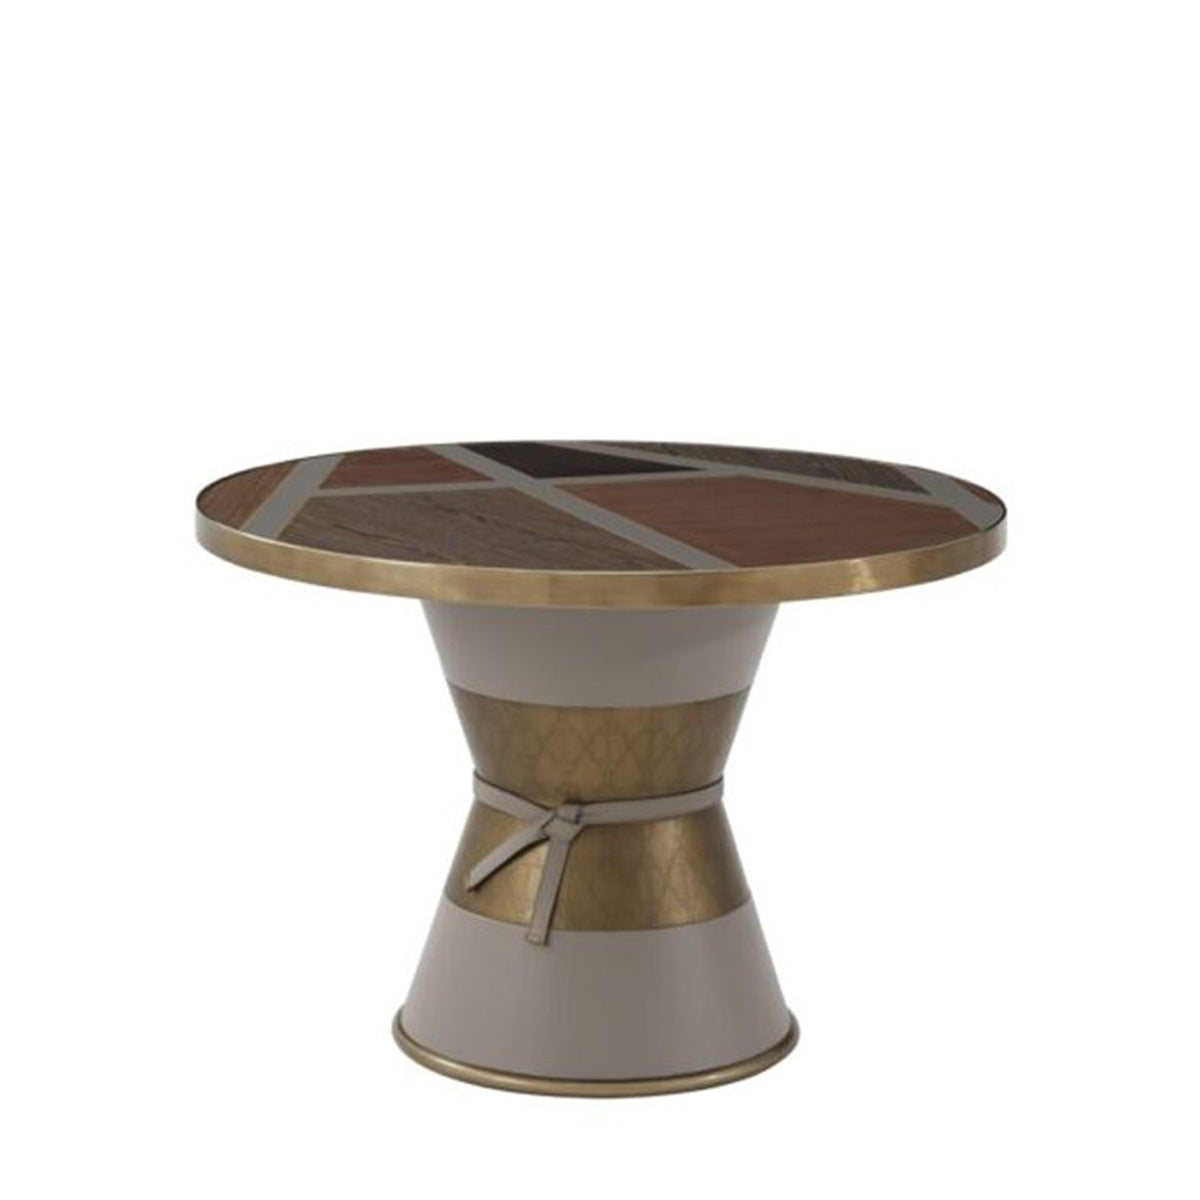 ICONIC SMALL ROUND DINING TABLE